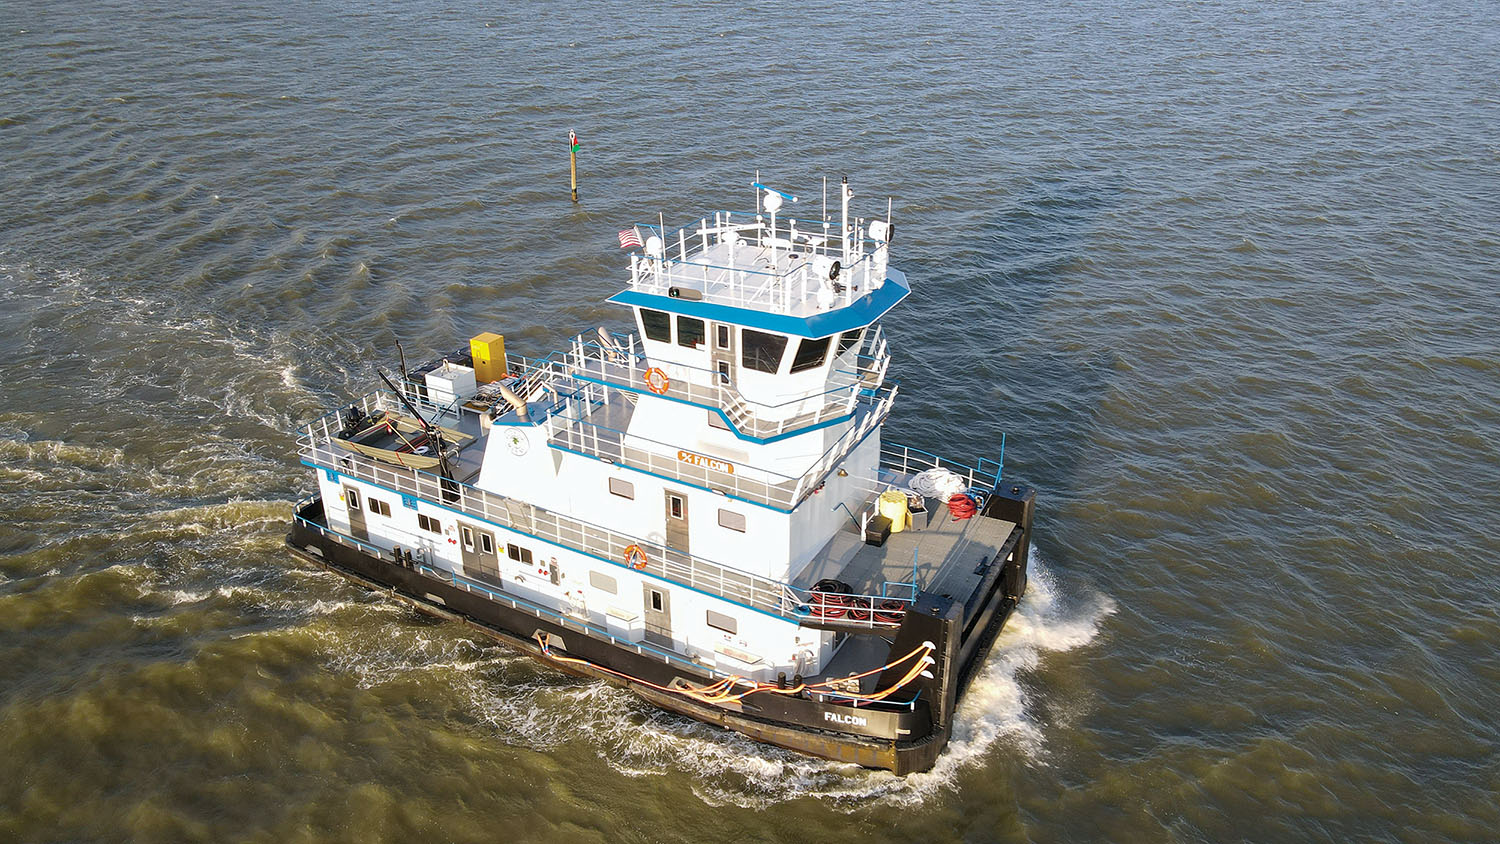 The 2,000 hp. mv. Falcon is the third of six identical towboats being built for Florida Marine Transporters by Steiner Shipyard.